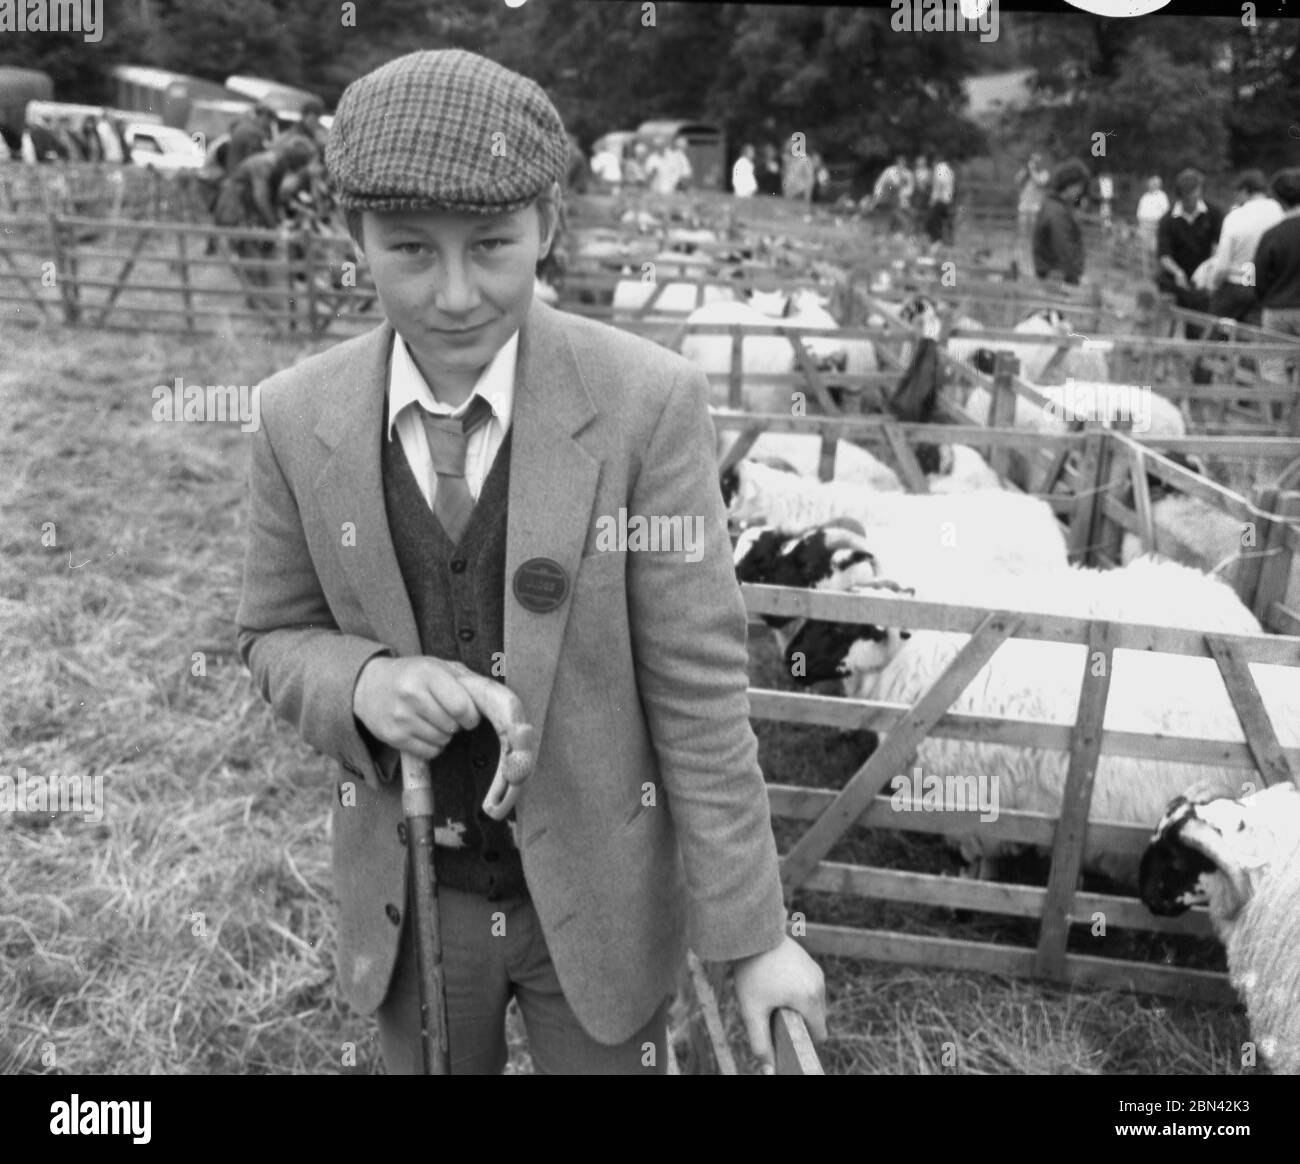 1980s, a smartly dressed young man, a Judge, in a jacket and tie and cloth cap standing in a sheep pen at the Farndale Show, Yorkshire, England, UK. Stock Photo